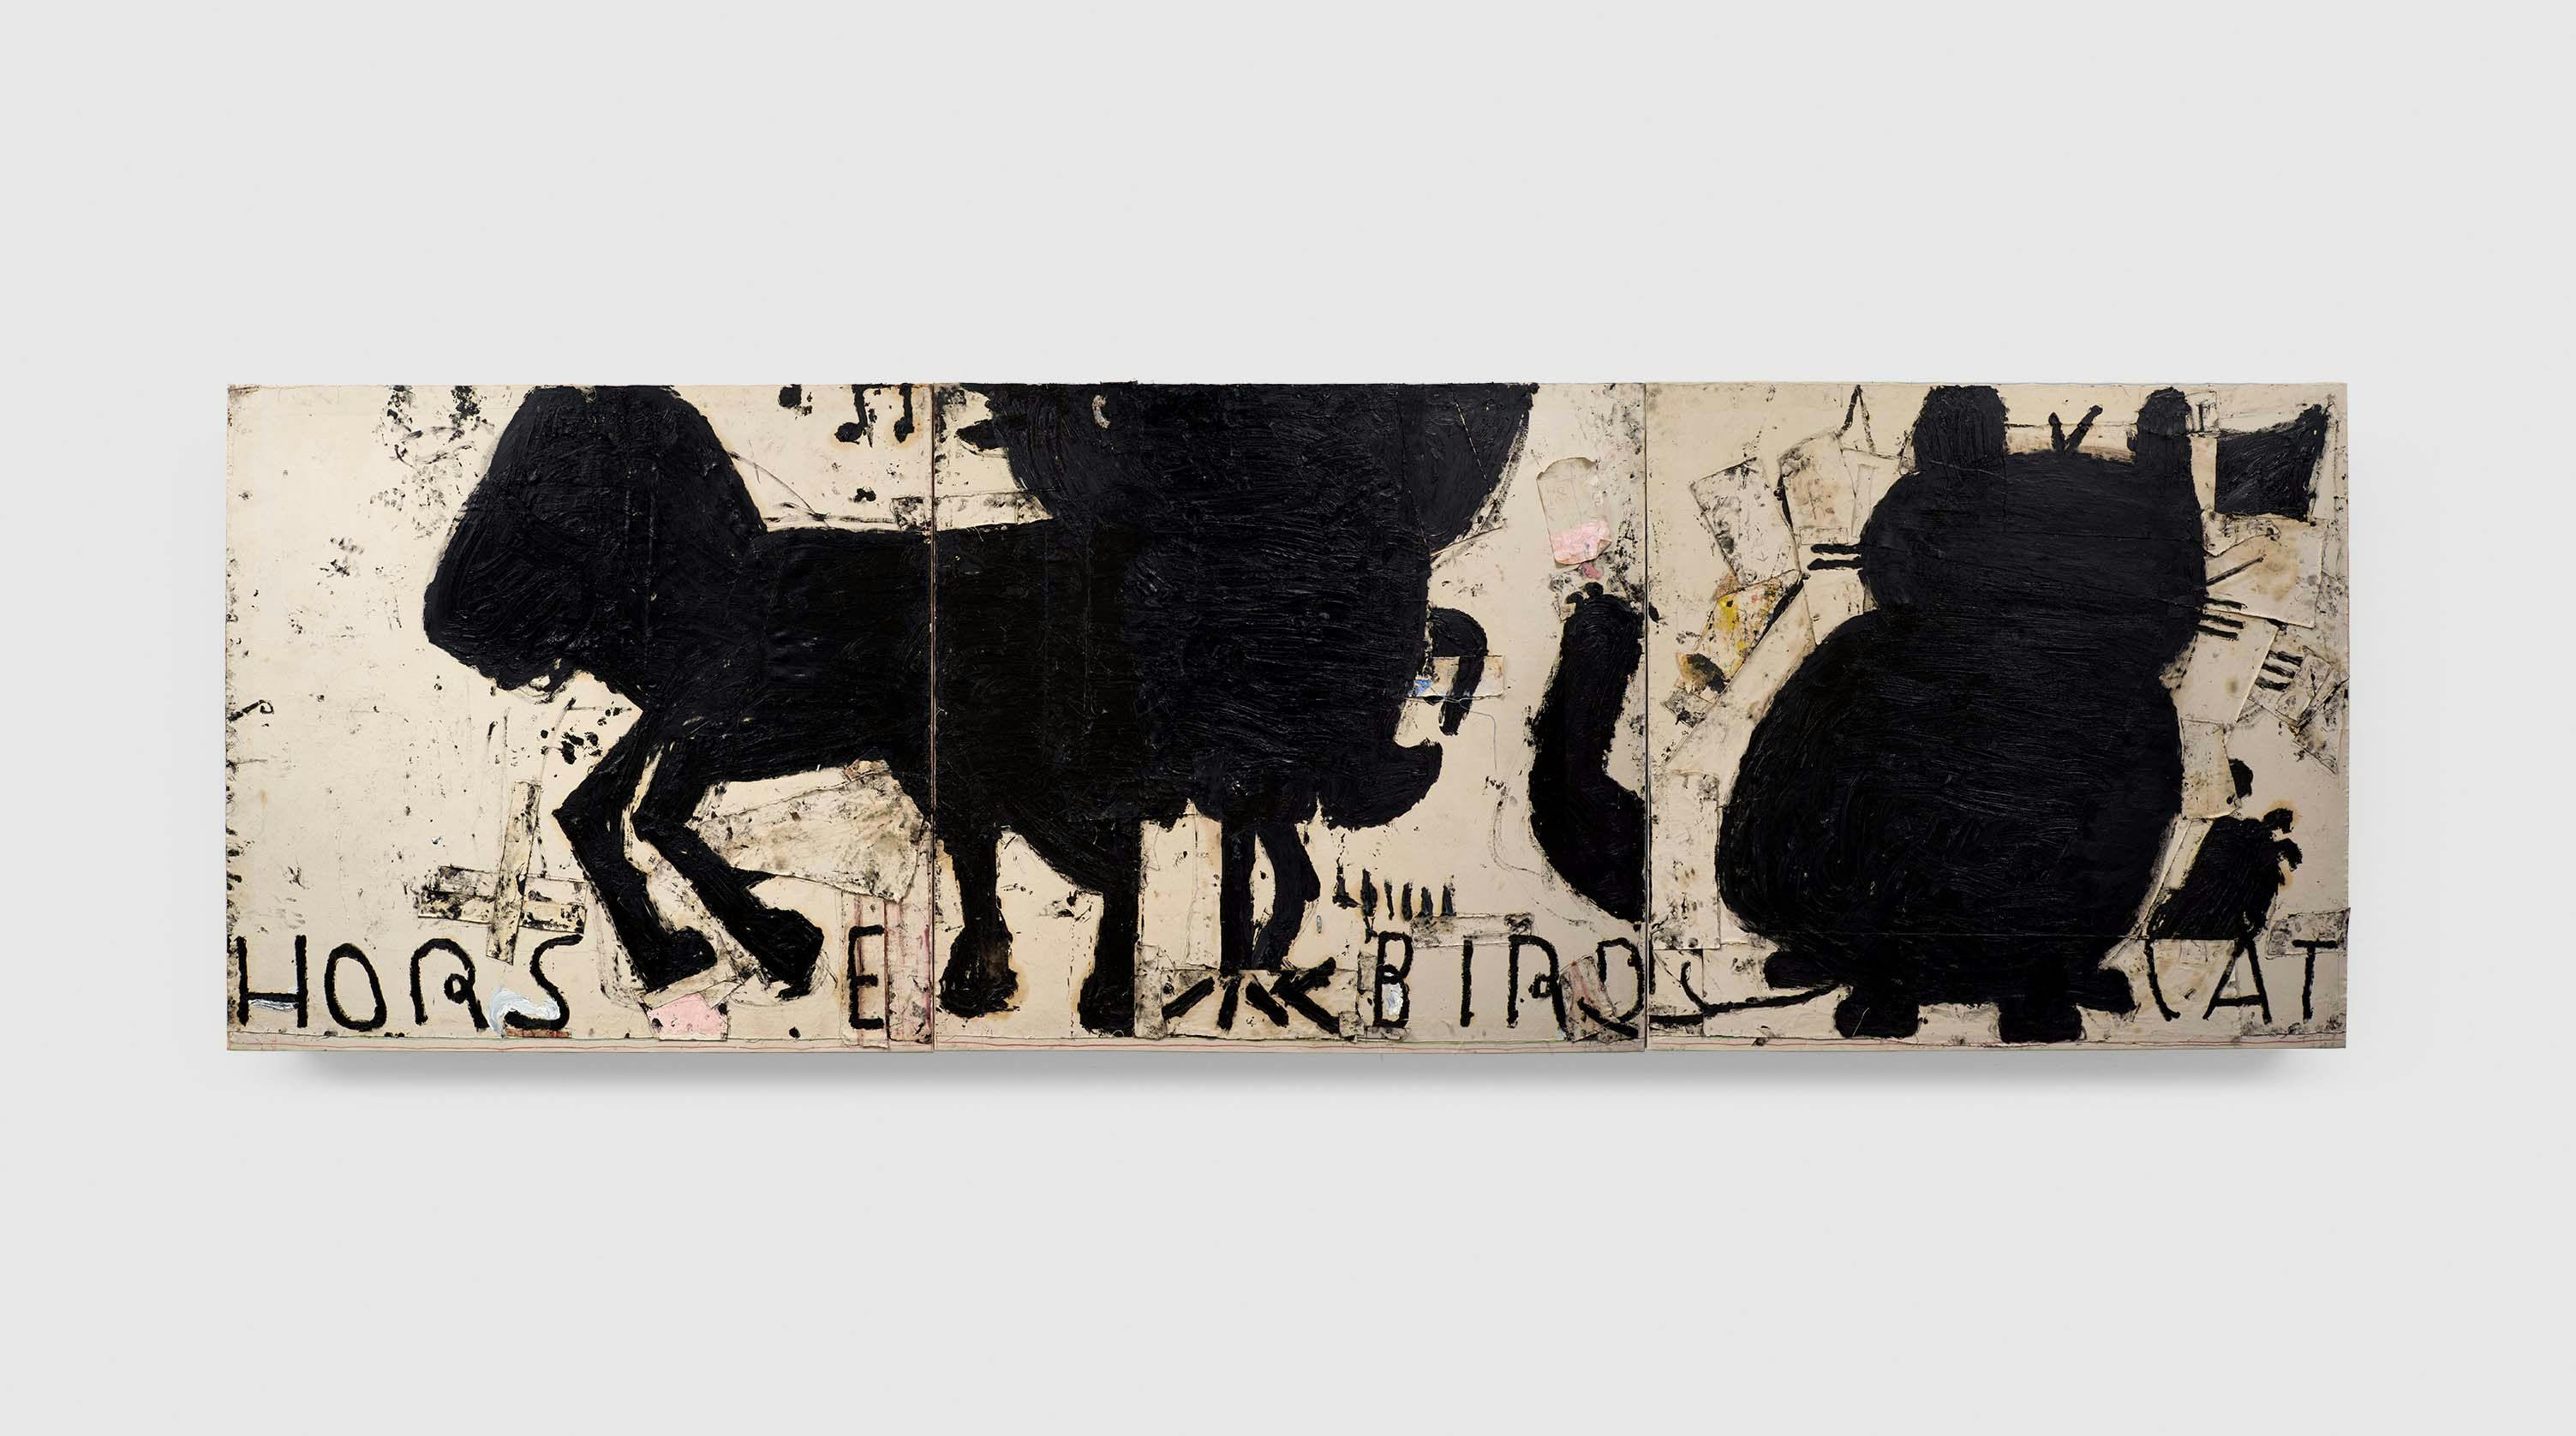 A painting by Rose Wylie, titled Black Painting; Horse, Bird, Cat, dated 2016.